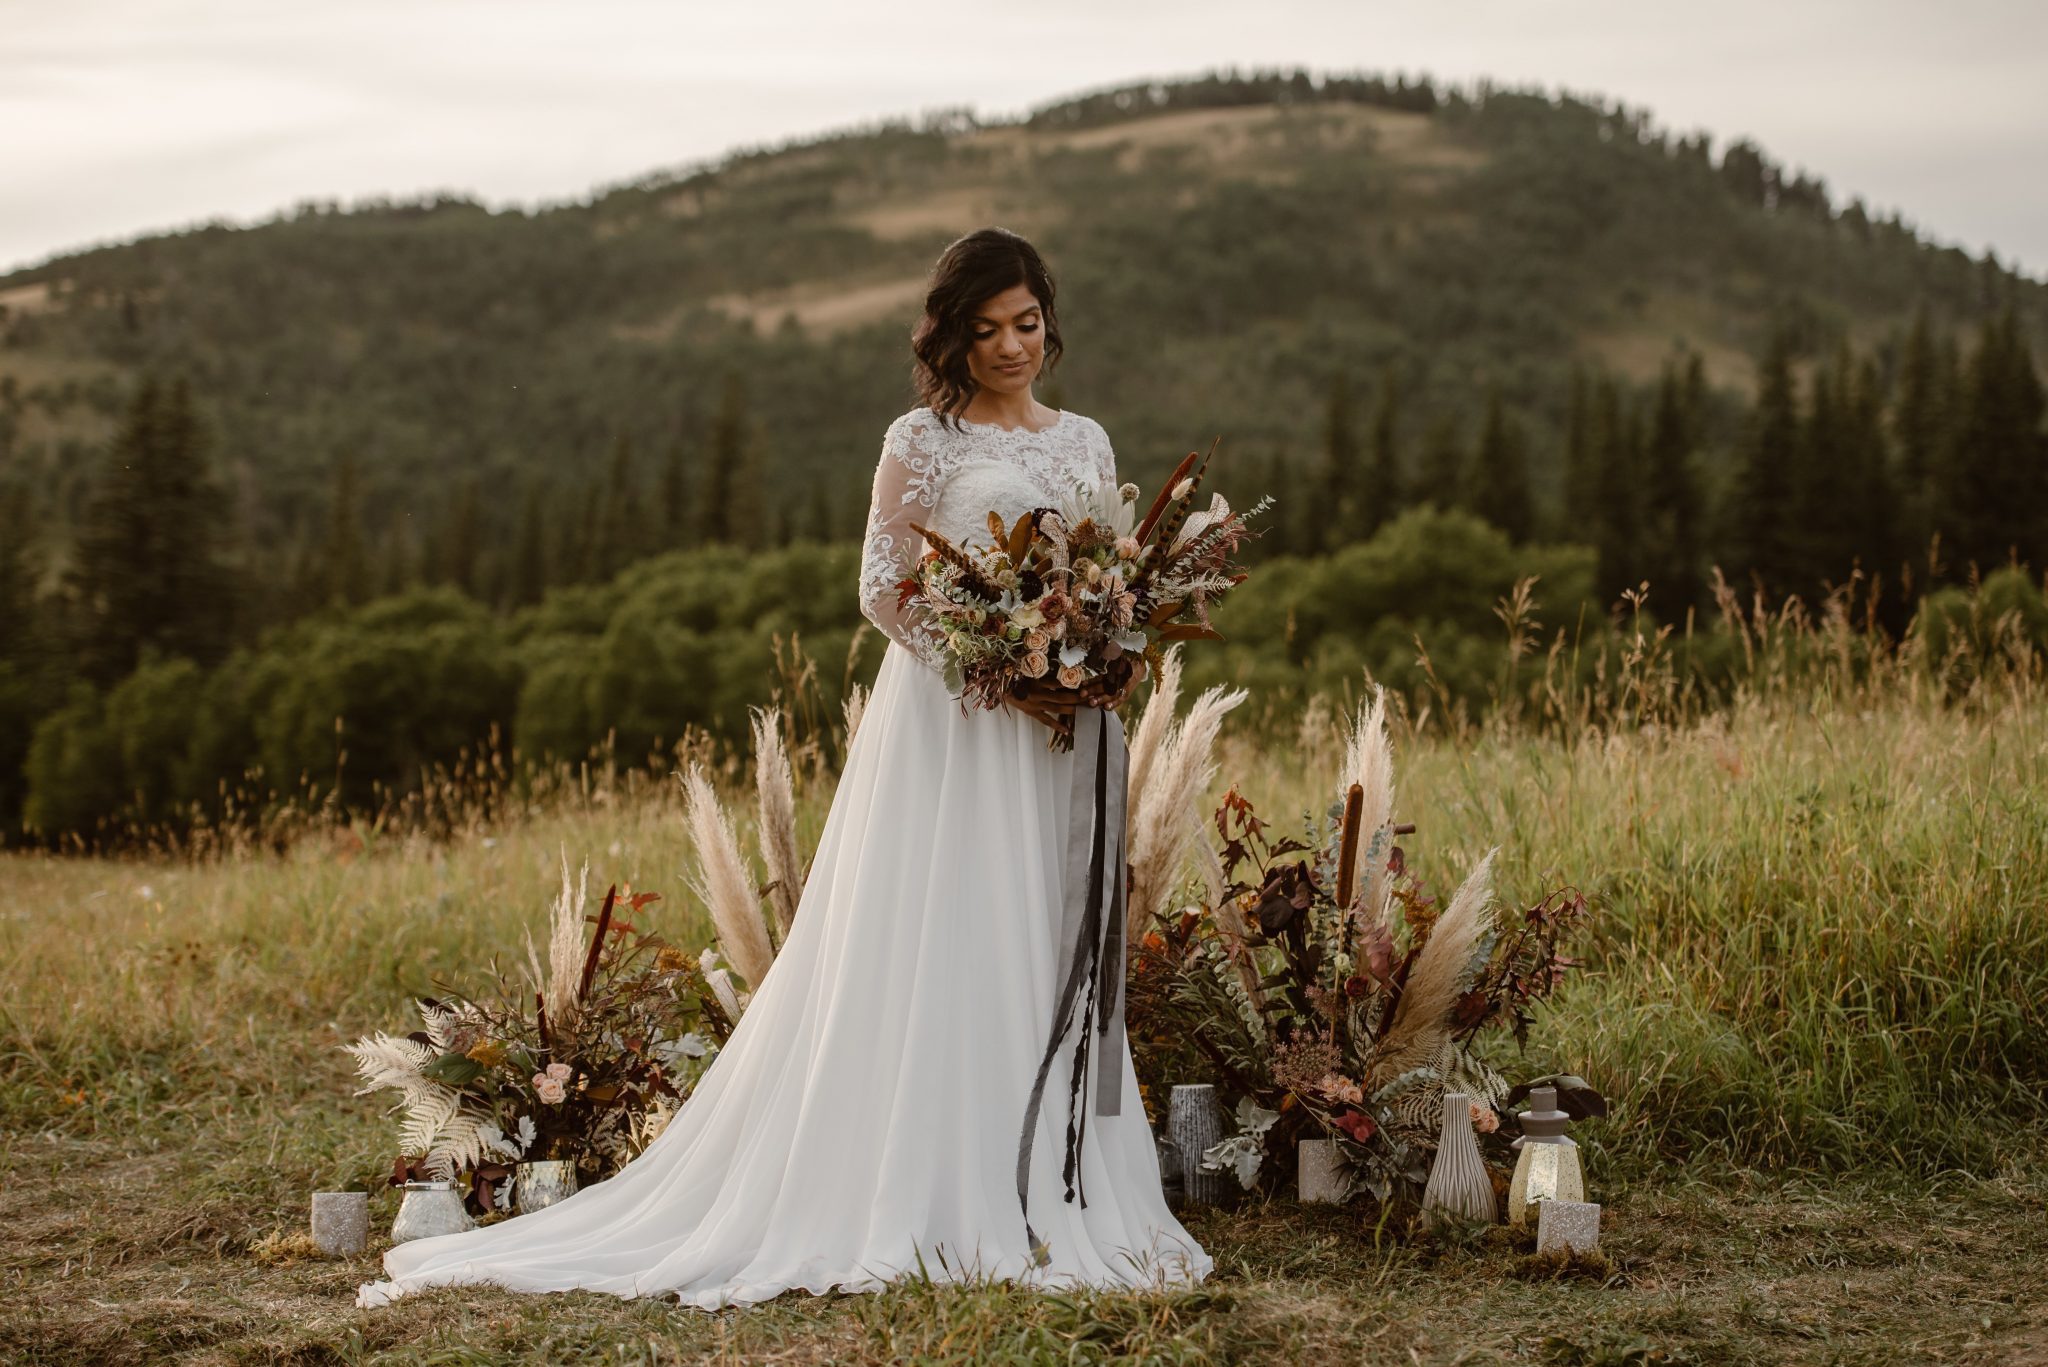 Earthy and Eclectic Moroccan Elopement at Big Horn Lookout featured on Brontë Bride - mountain elopement, alberta elopement, eclectic wedding